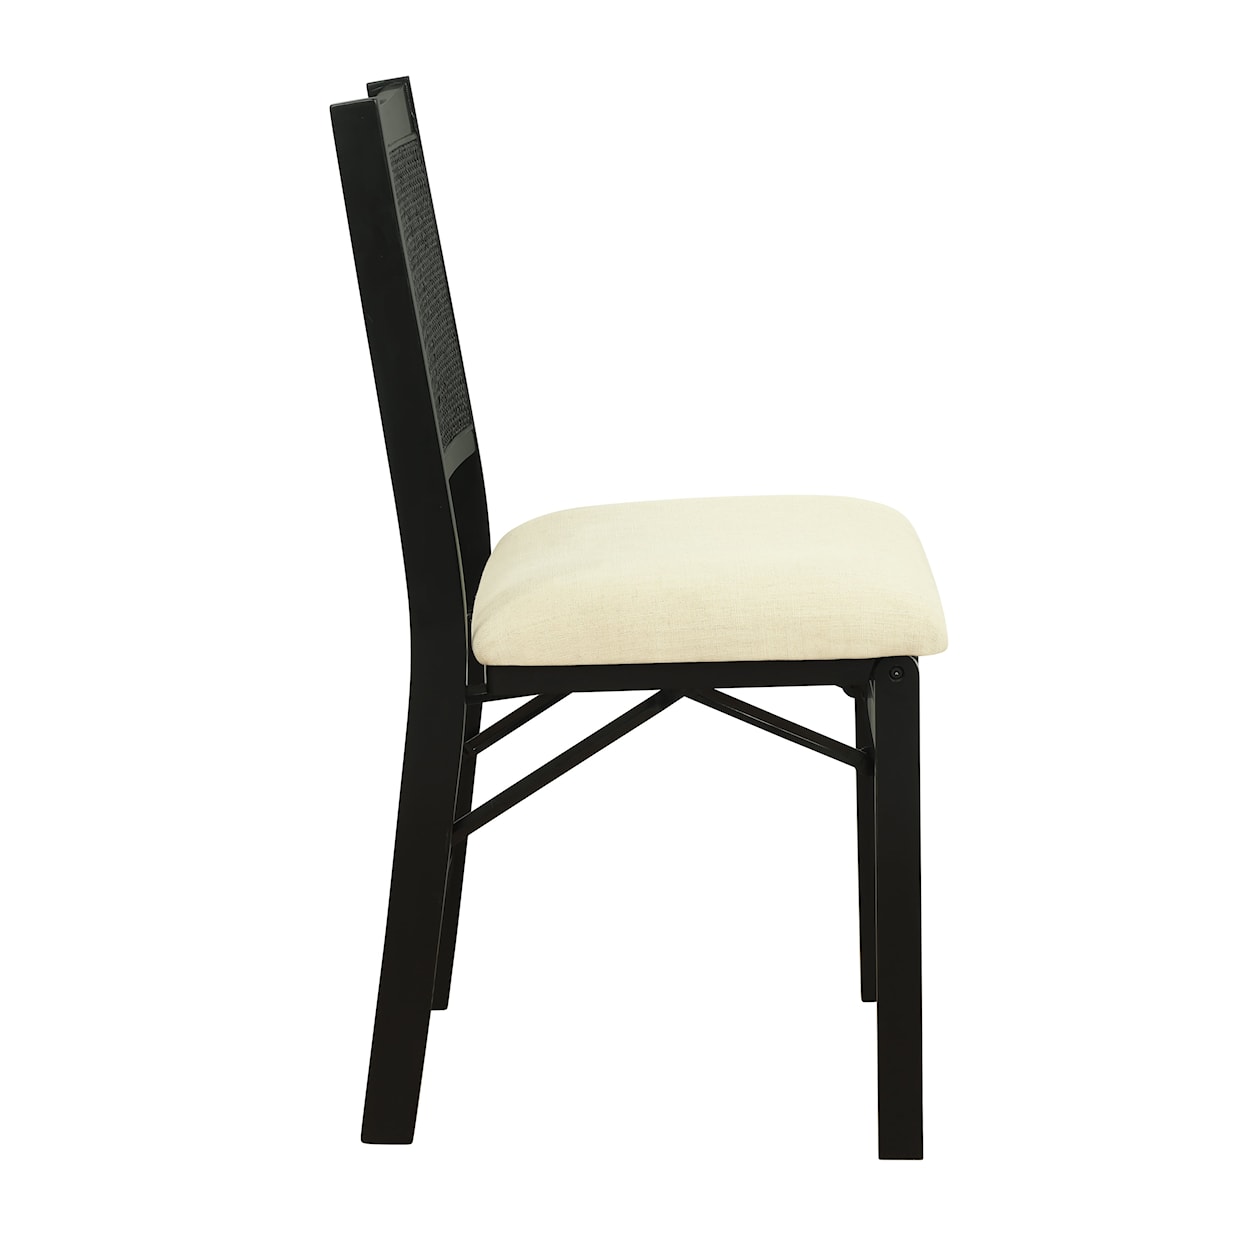 Powell Bauer Upholstered Cane Folding Chair